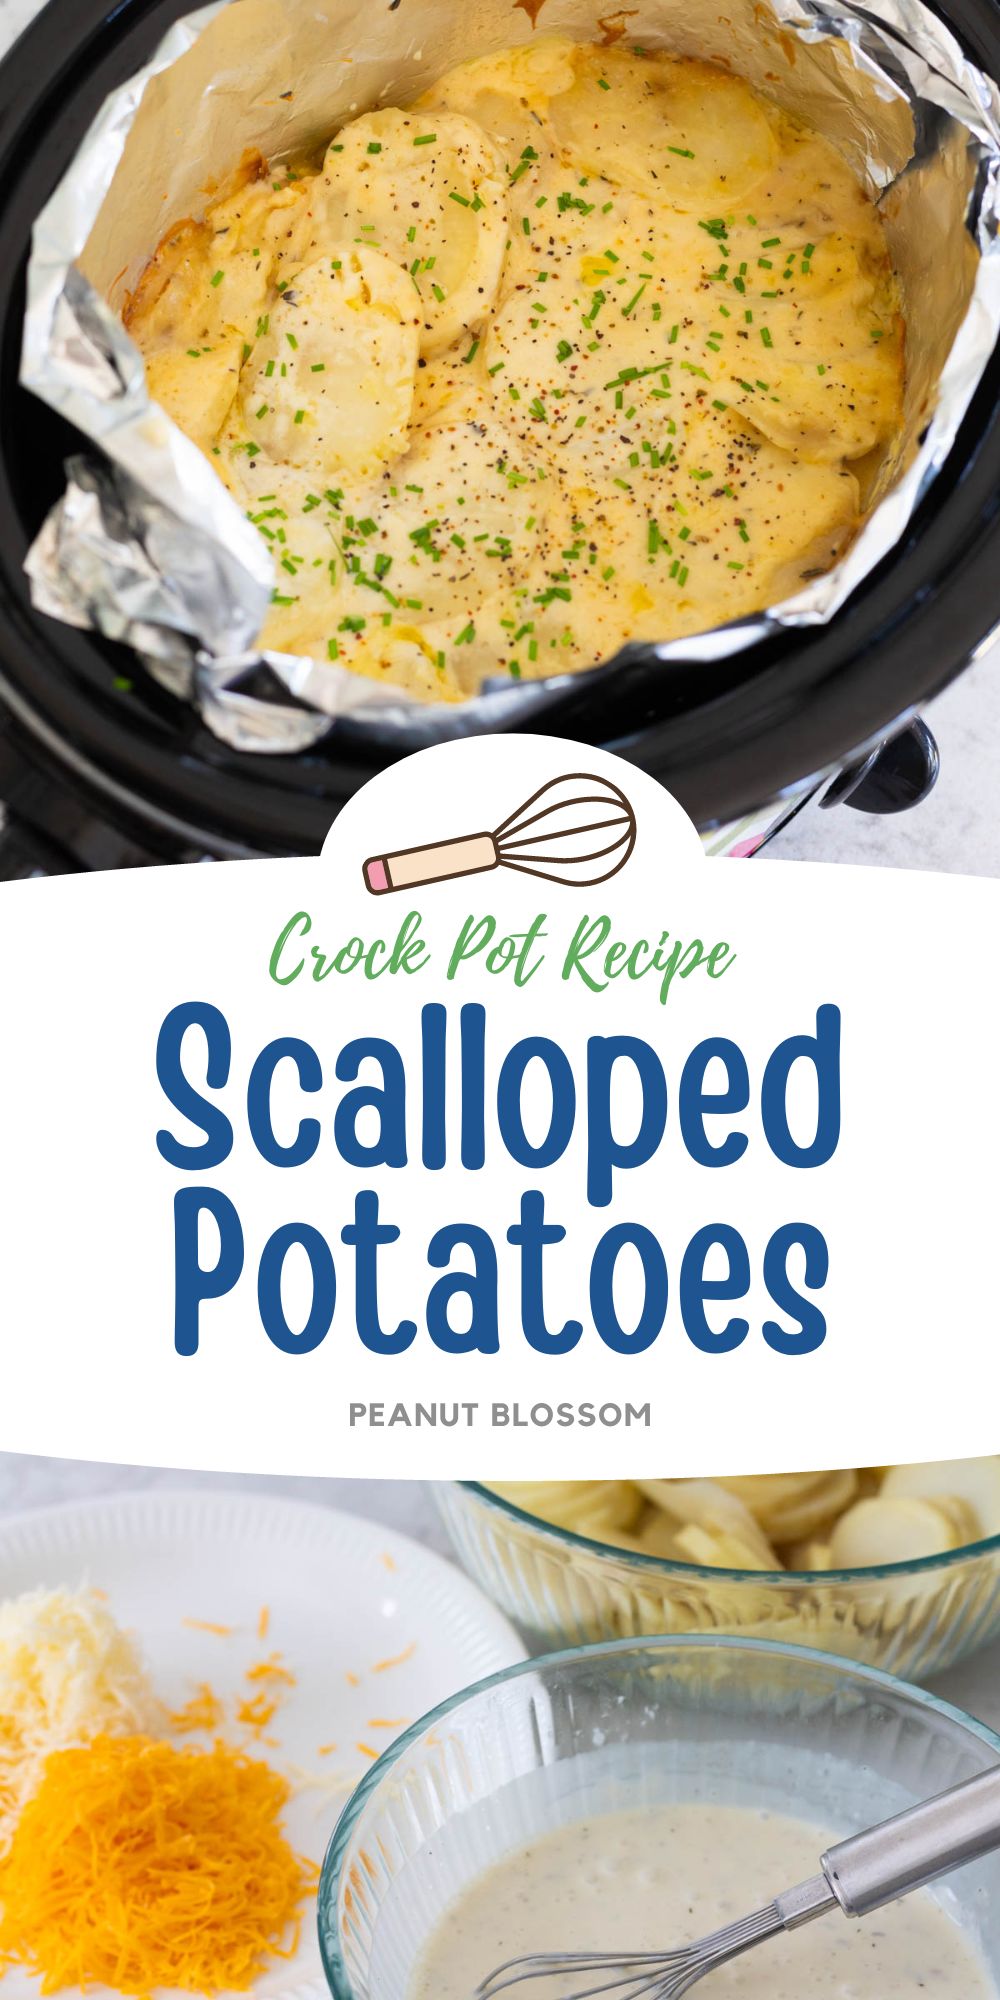 The photo collage shows the finished scalloped potatoes in a slowcooker with fresh chives sprinkled over the top next to a photo of the shredded cheese, prepared cream sauce, and bowl of sliced potatoes.